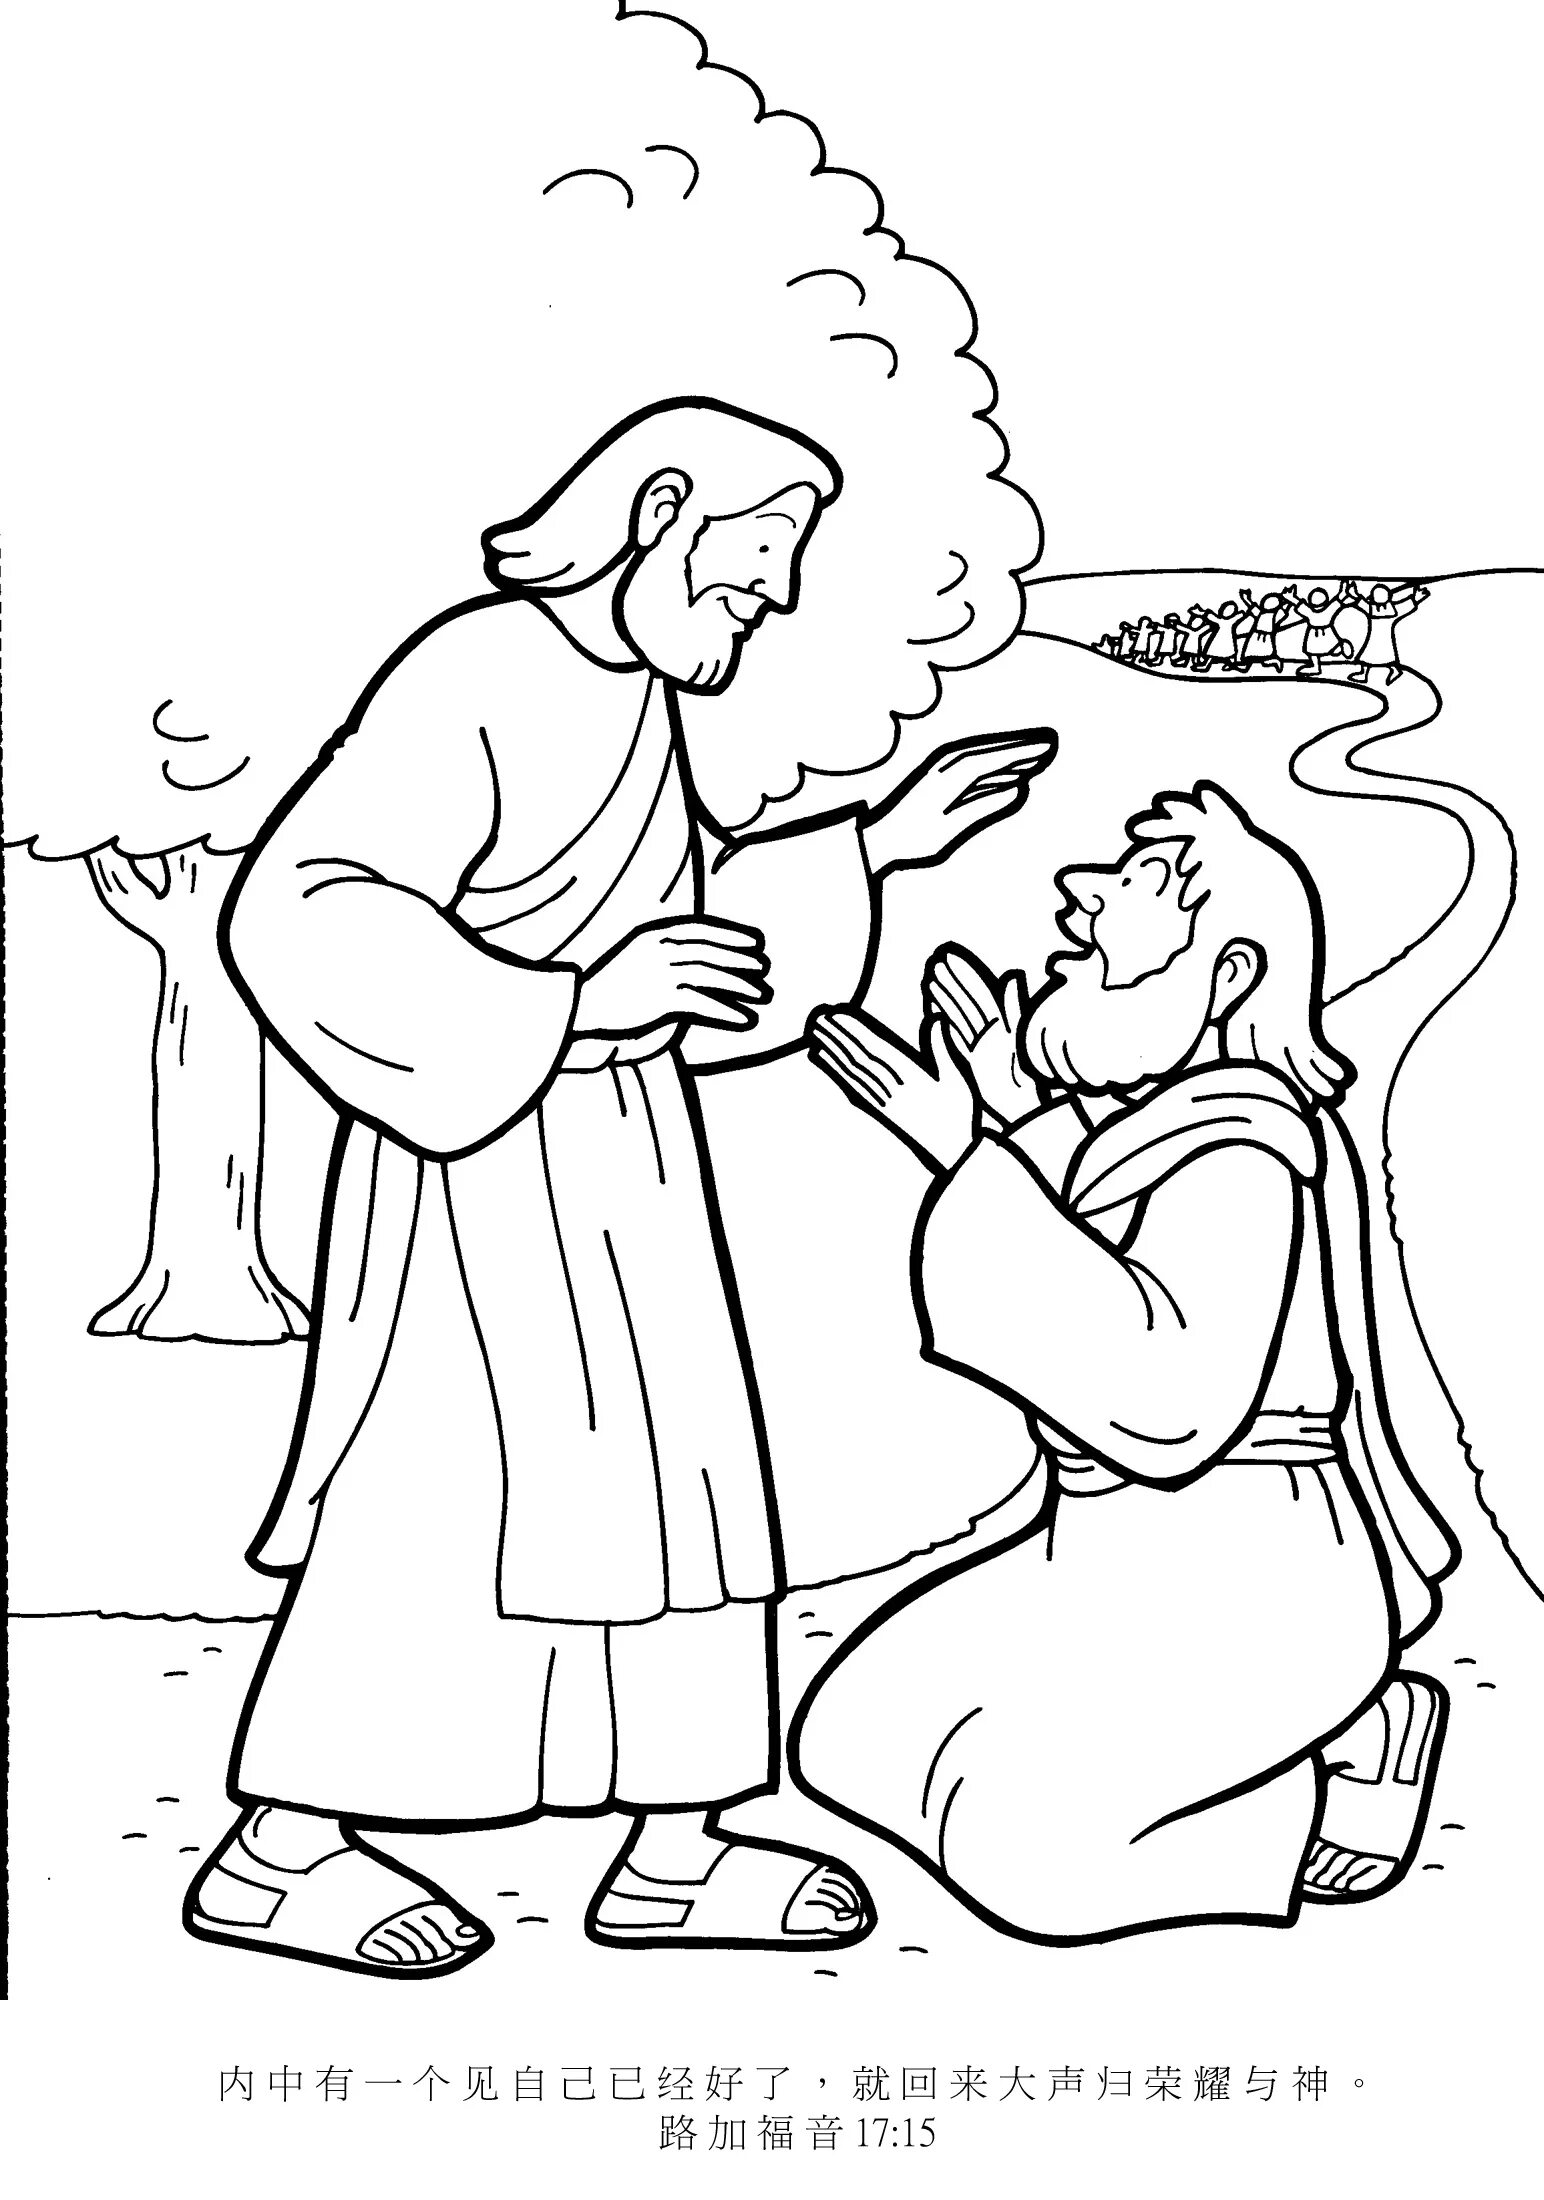 Coloring page 10 flower-mad lepers